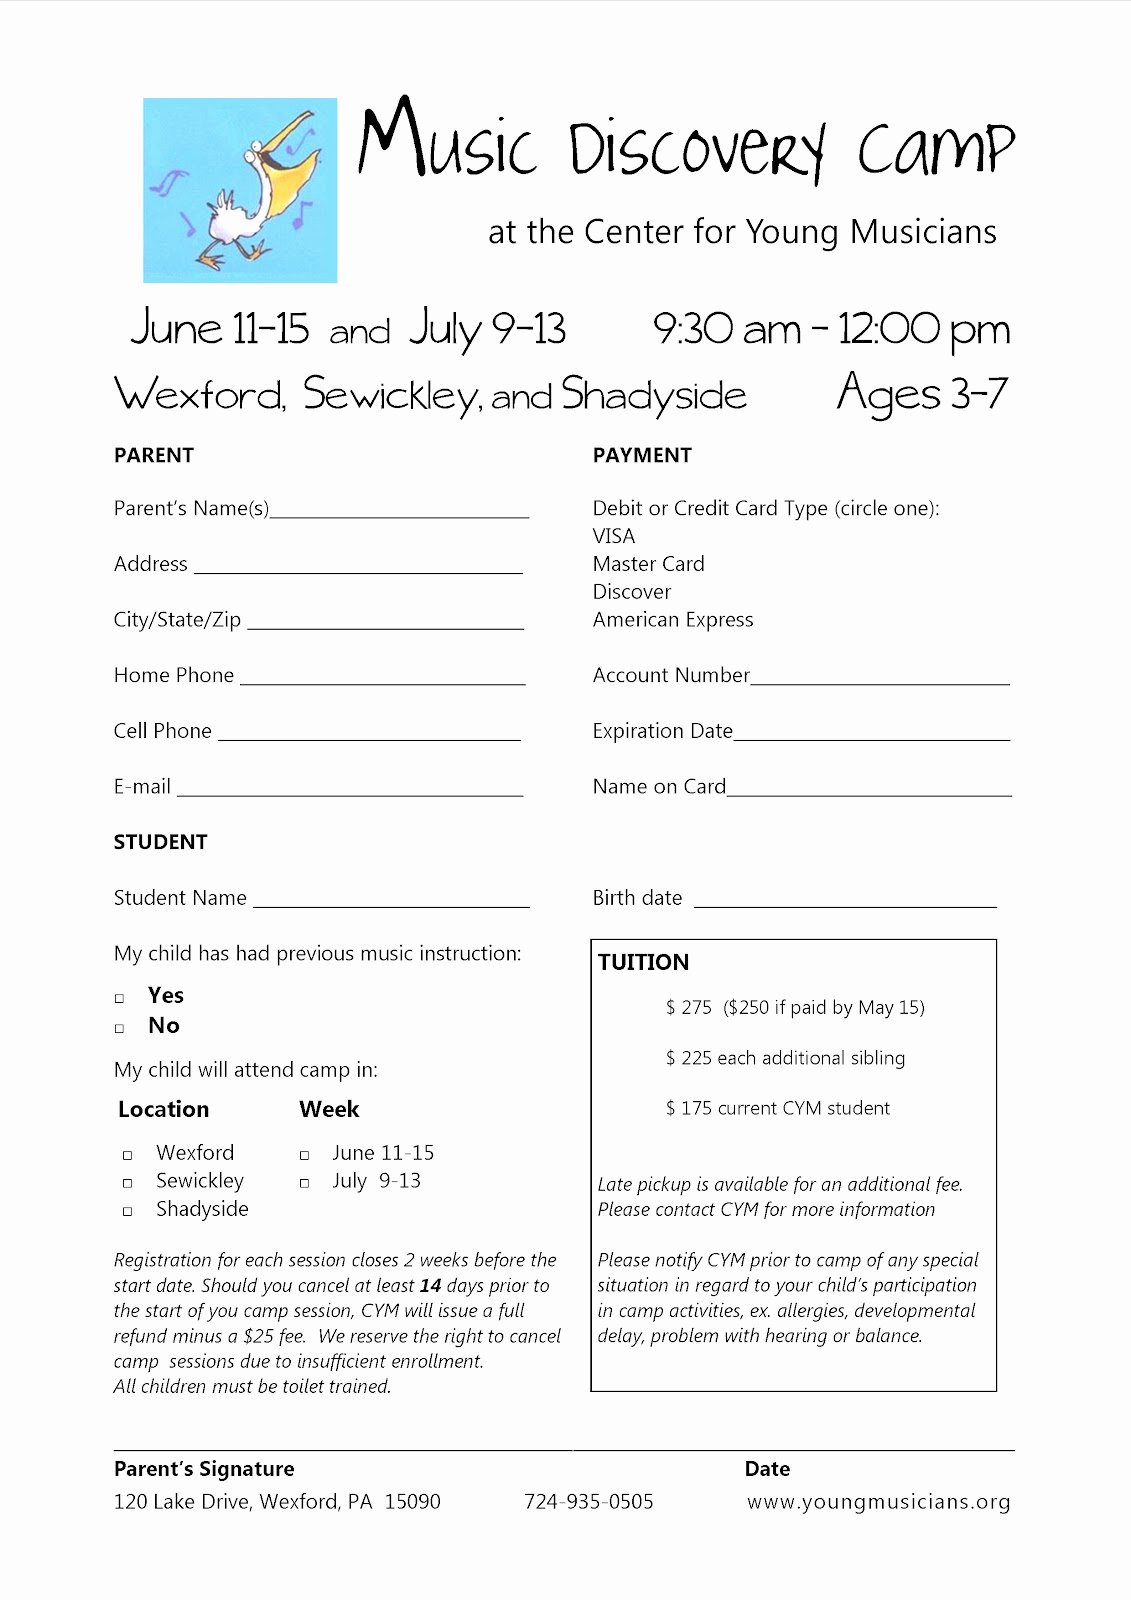 Camp Registration forms Elegant Take Note Music Discovery Camp 2012 Registering now